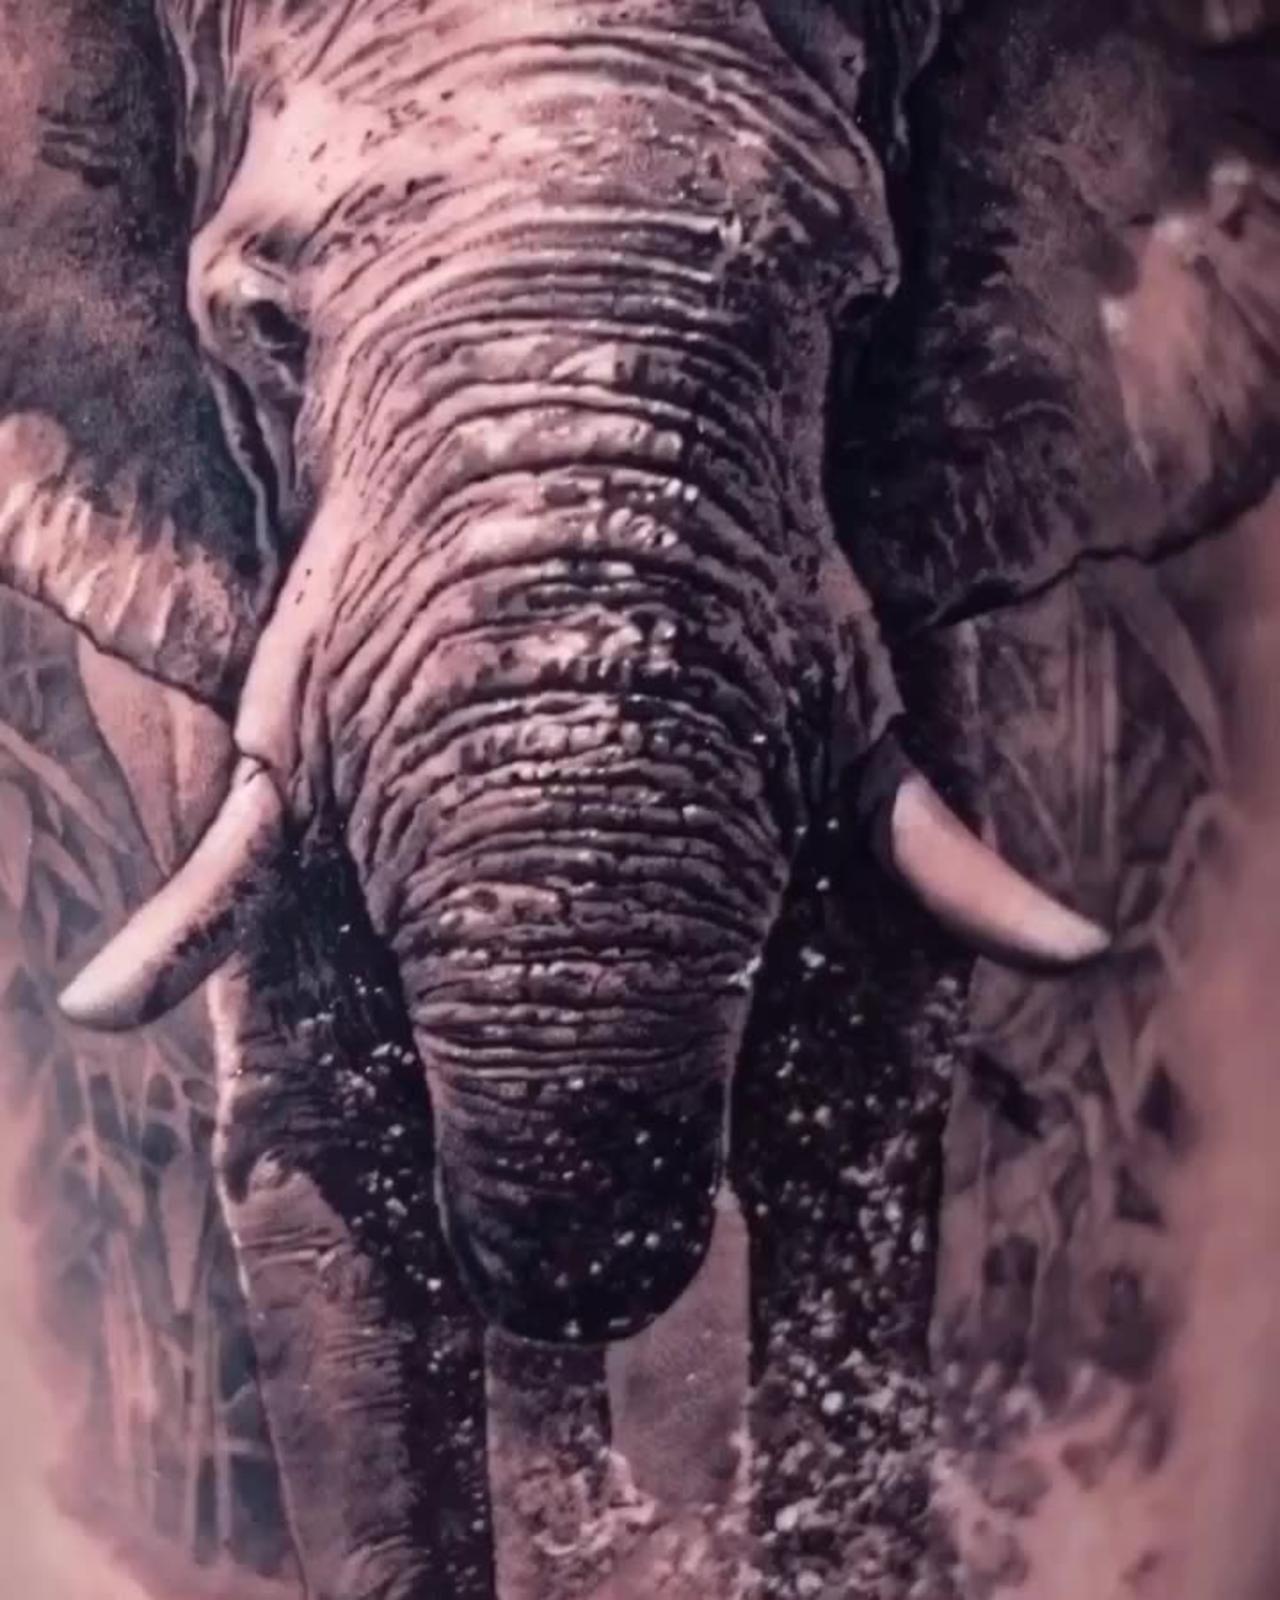 I LOVE Elephants! What About you? - Jose Contreras in TEXAS